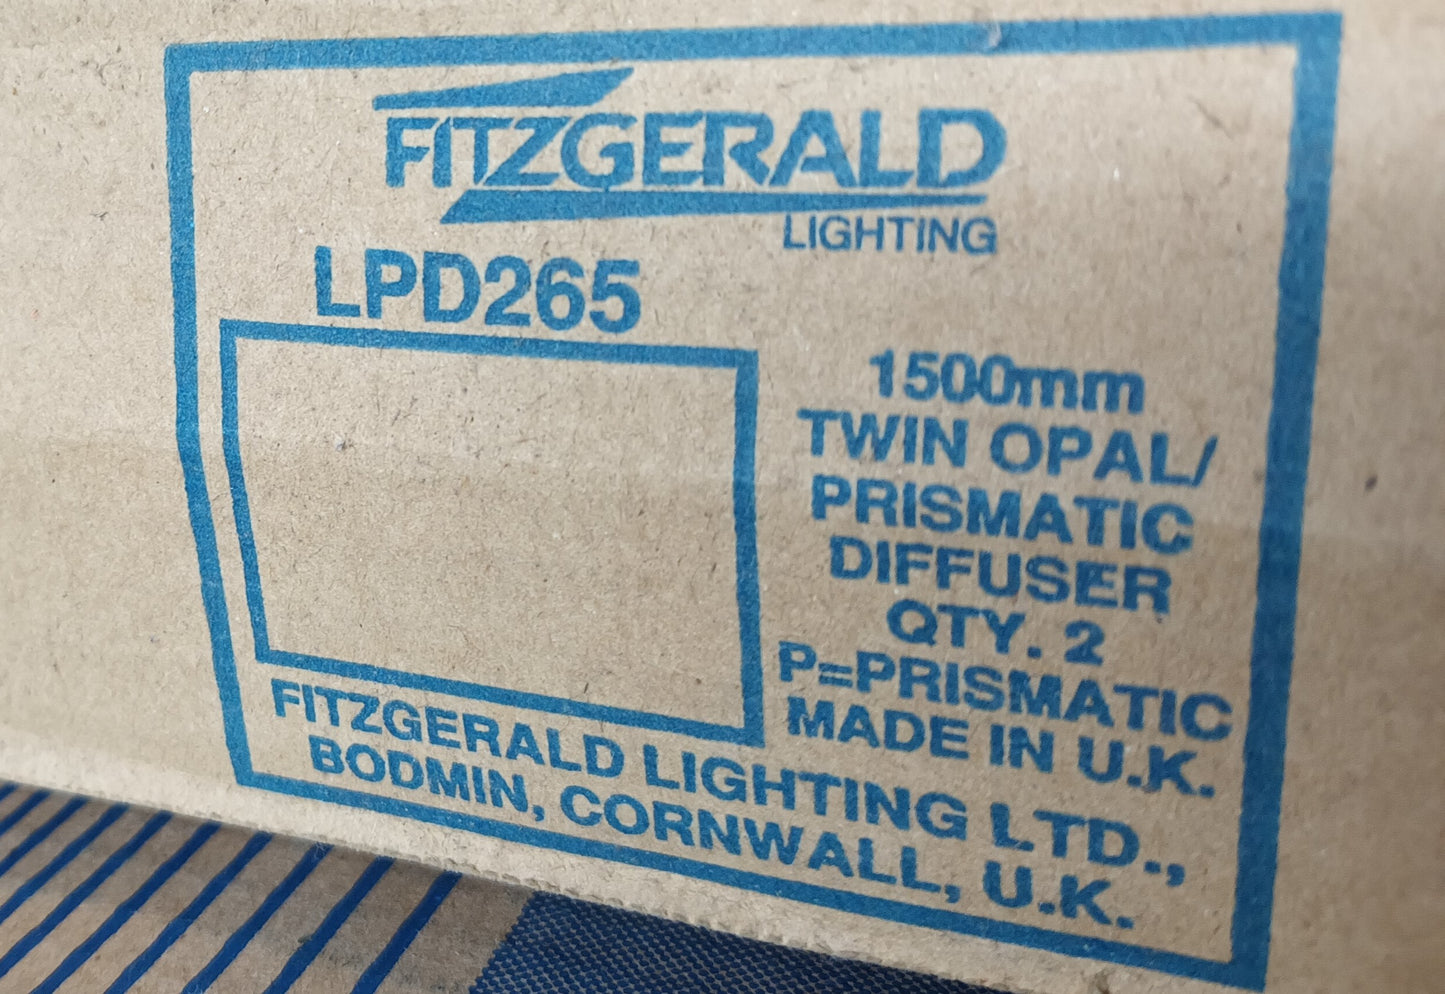 5ft Fitzgerald LPD265 Prism Diffuser Pack of 2